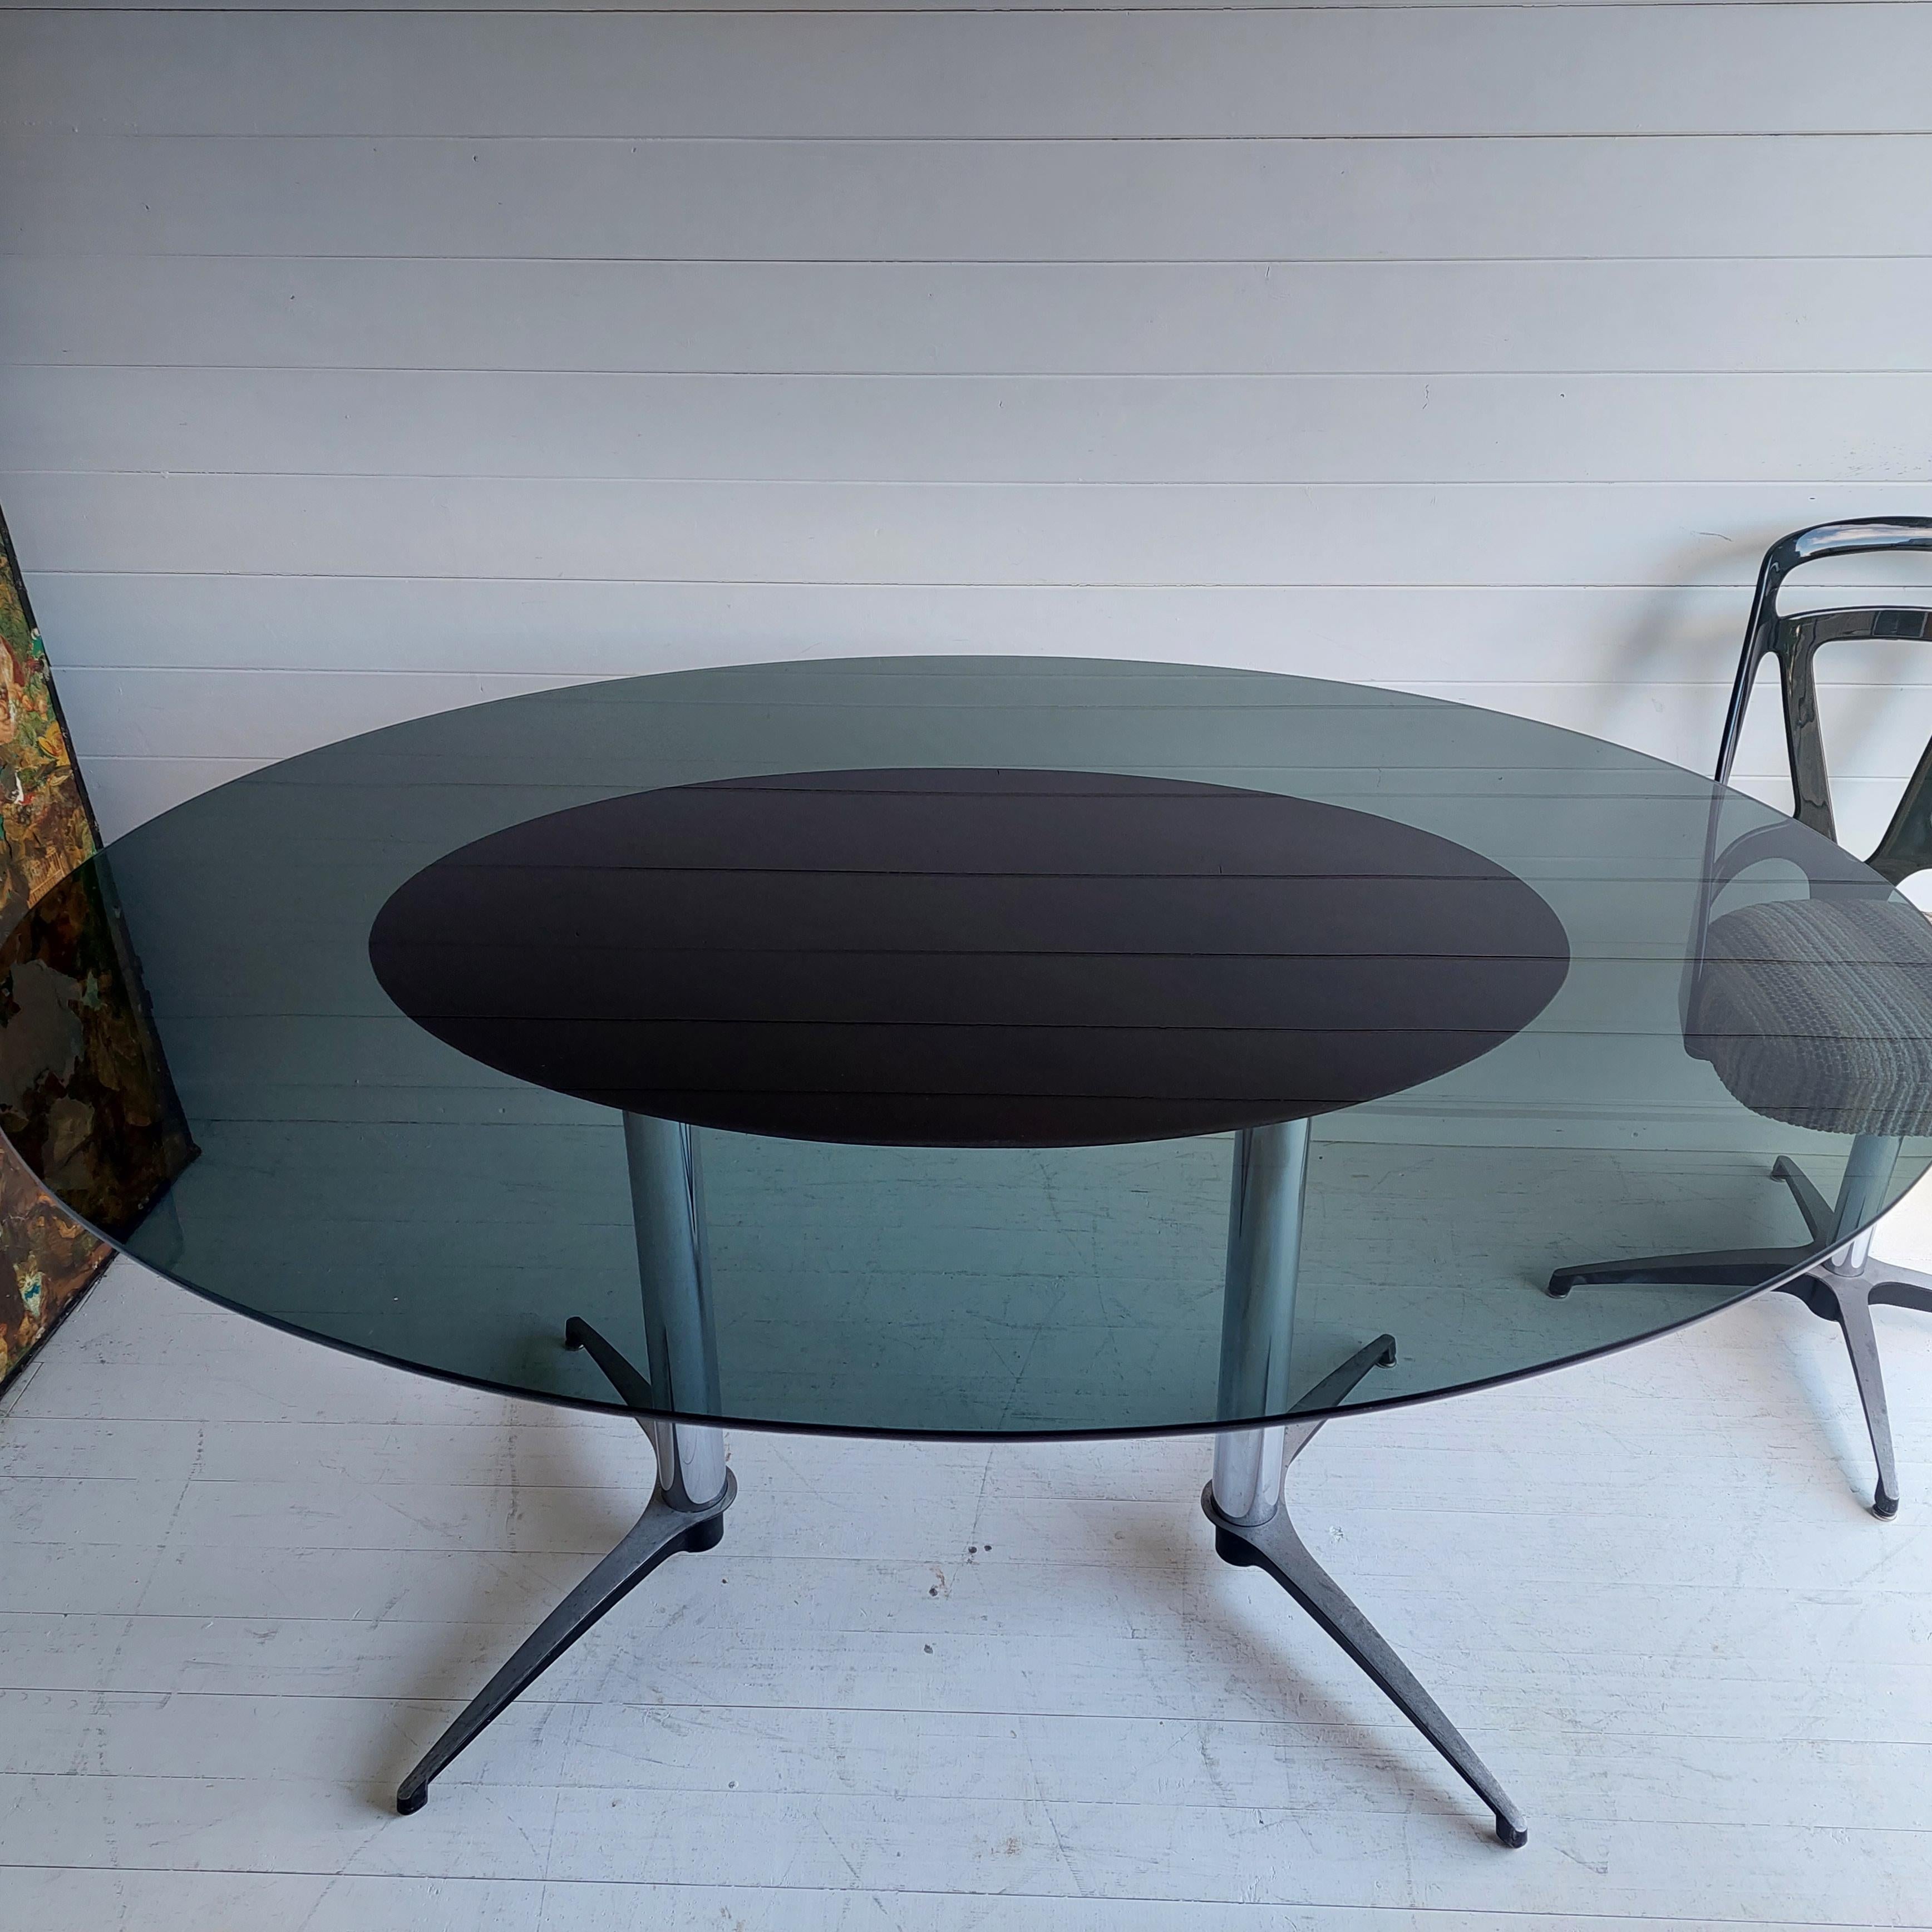 Retro Chromcraft USA Grafton Atomic Dining Table.
A fantastic and extremely stylish 1972 dining room furniture.

A large oval dining room table with smoked glass top, and cast aluminium legs.

This table is in outstanding condition for its